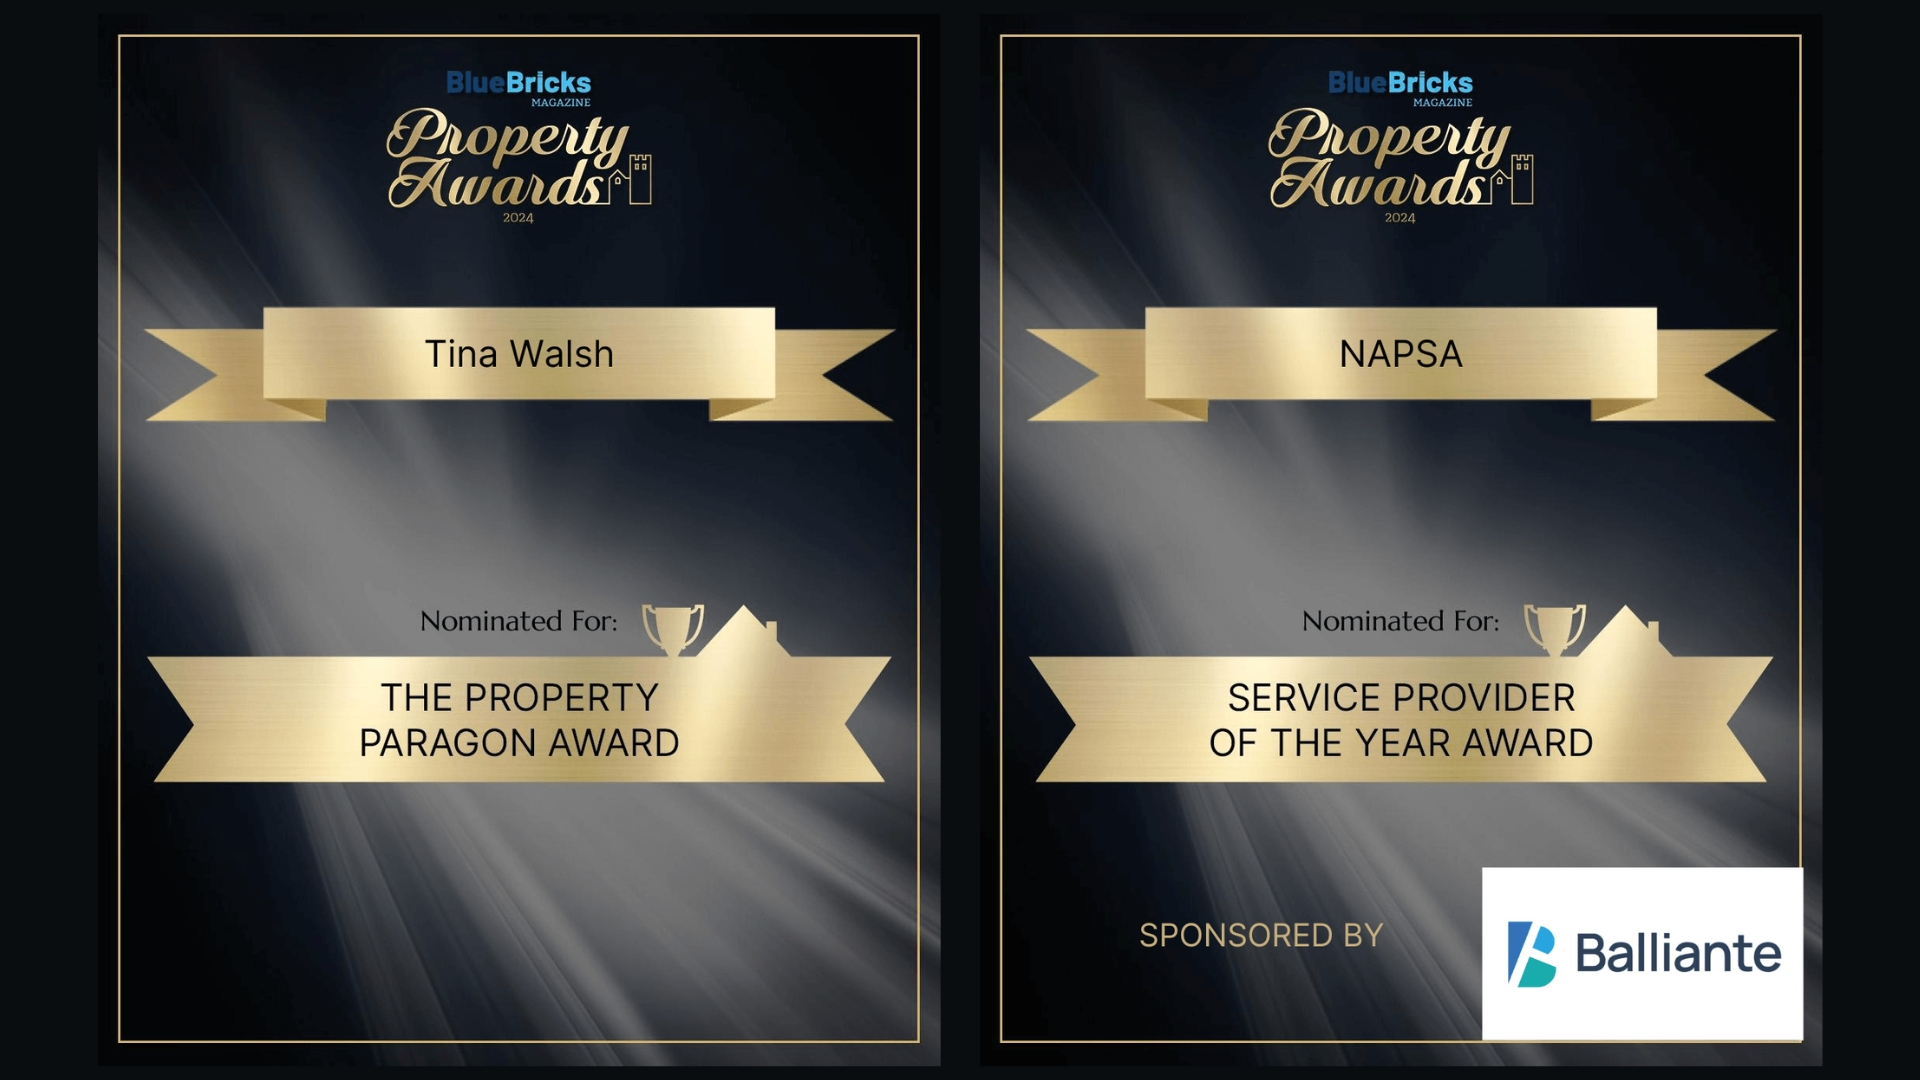 National Association of Professional Sourcing Agents (NAPSA) nominated for Service Provider of the Year Award.